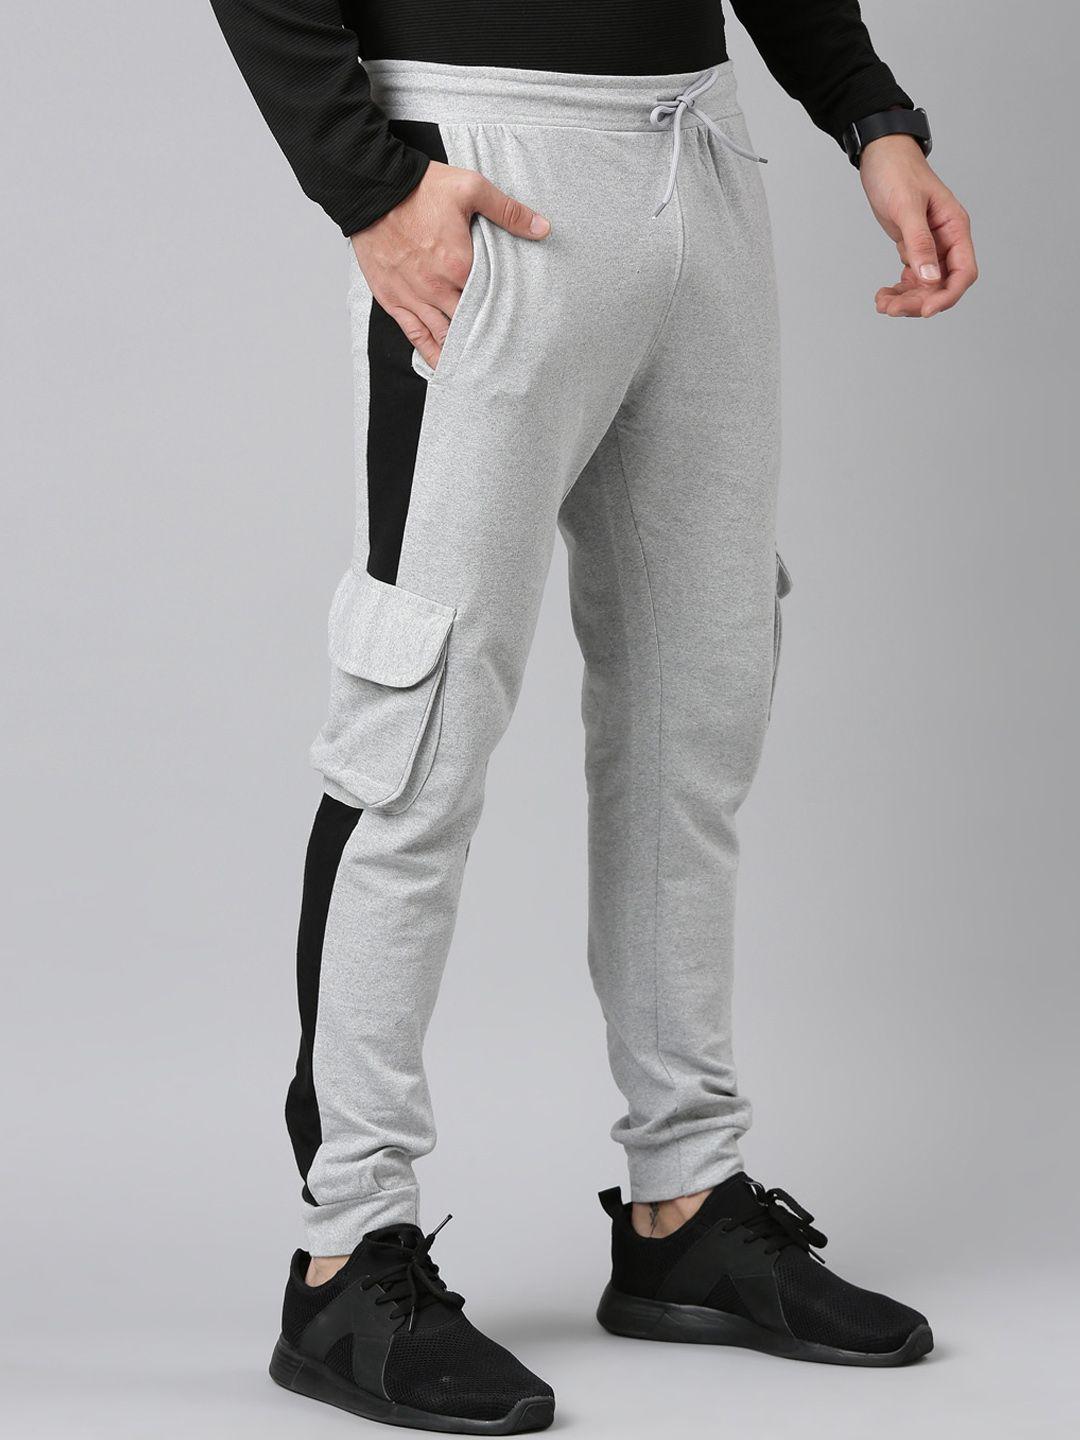 madsto-men-striped-training-or-gym-cotton-joggers